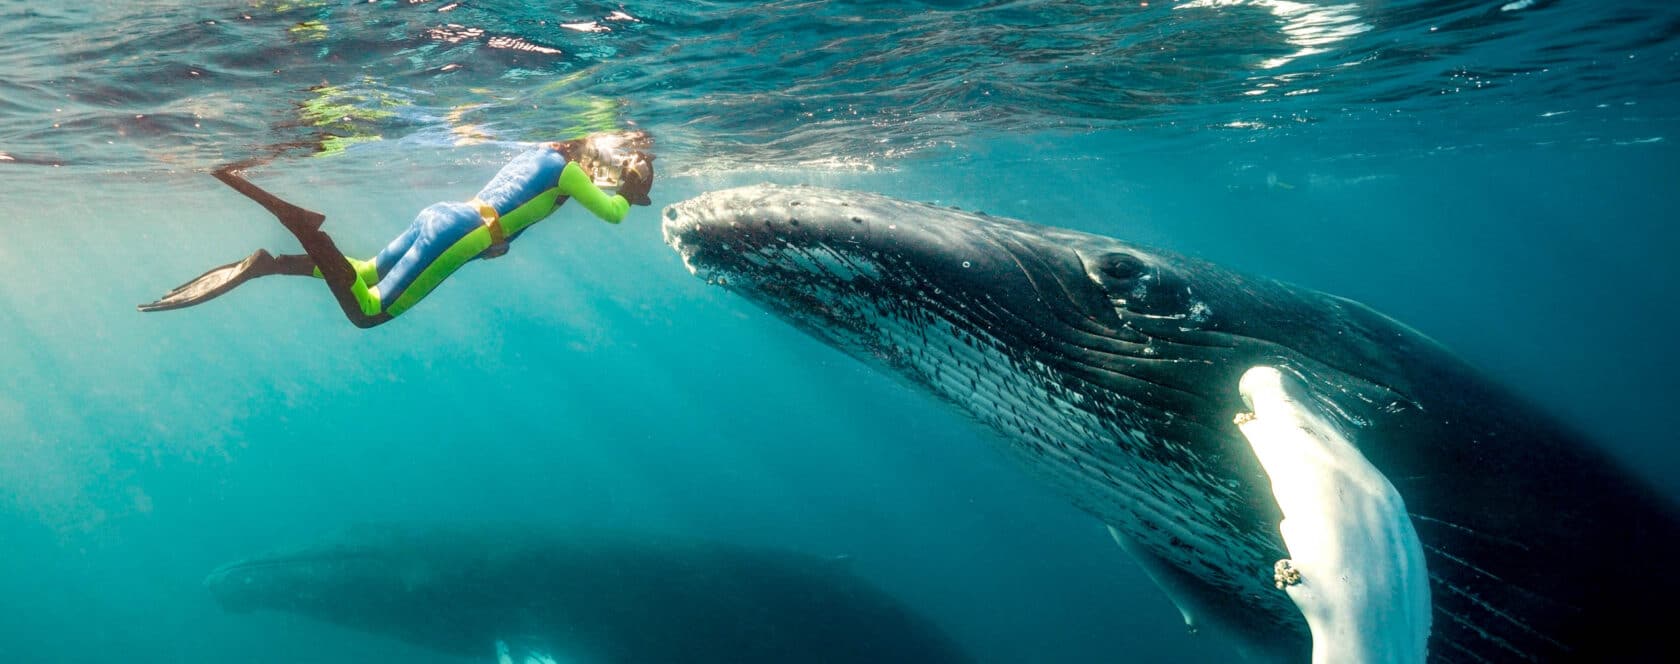 A snorkeler and a humpback whale.